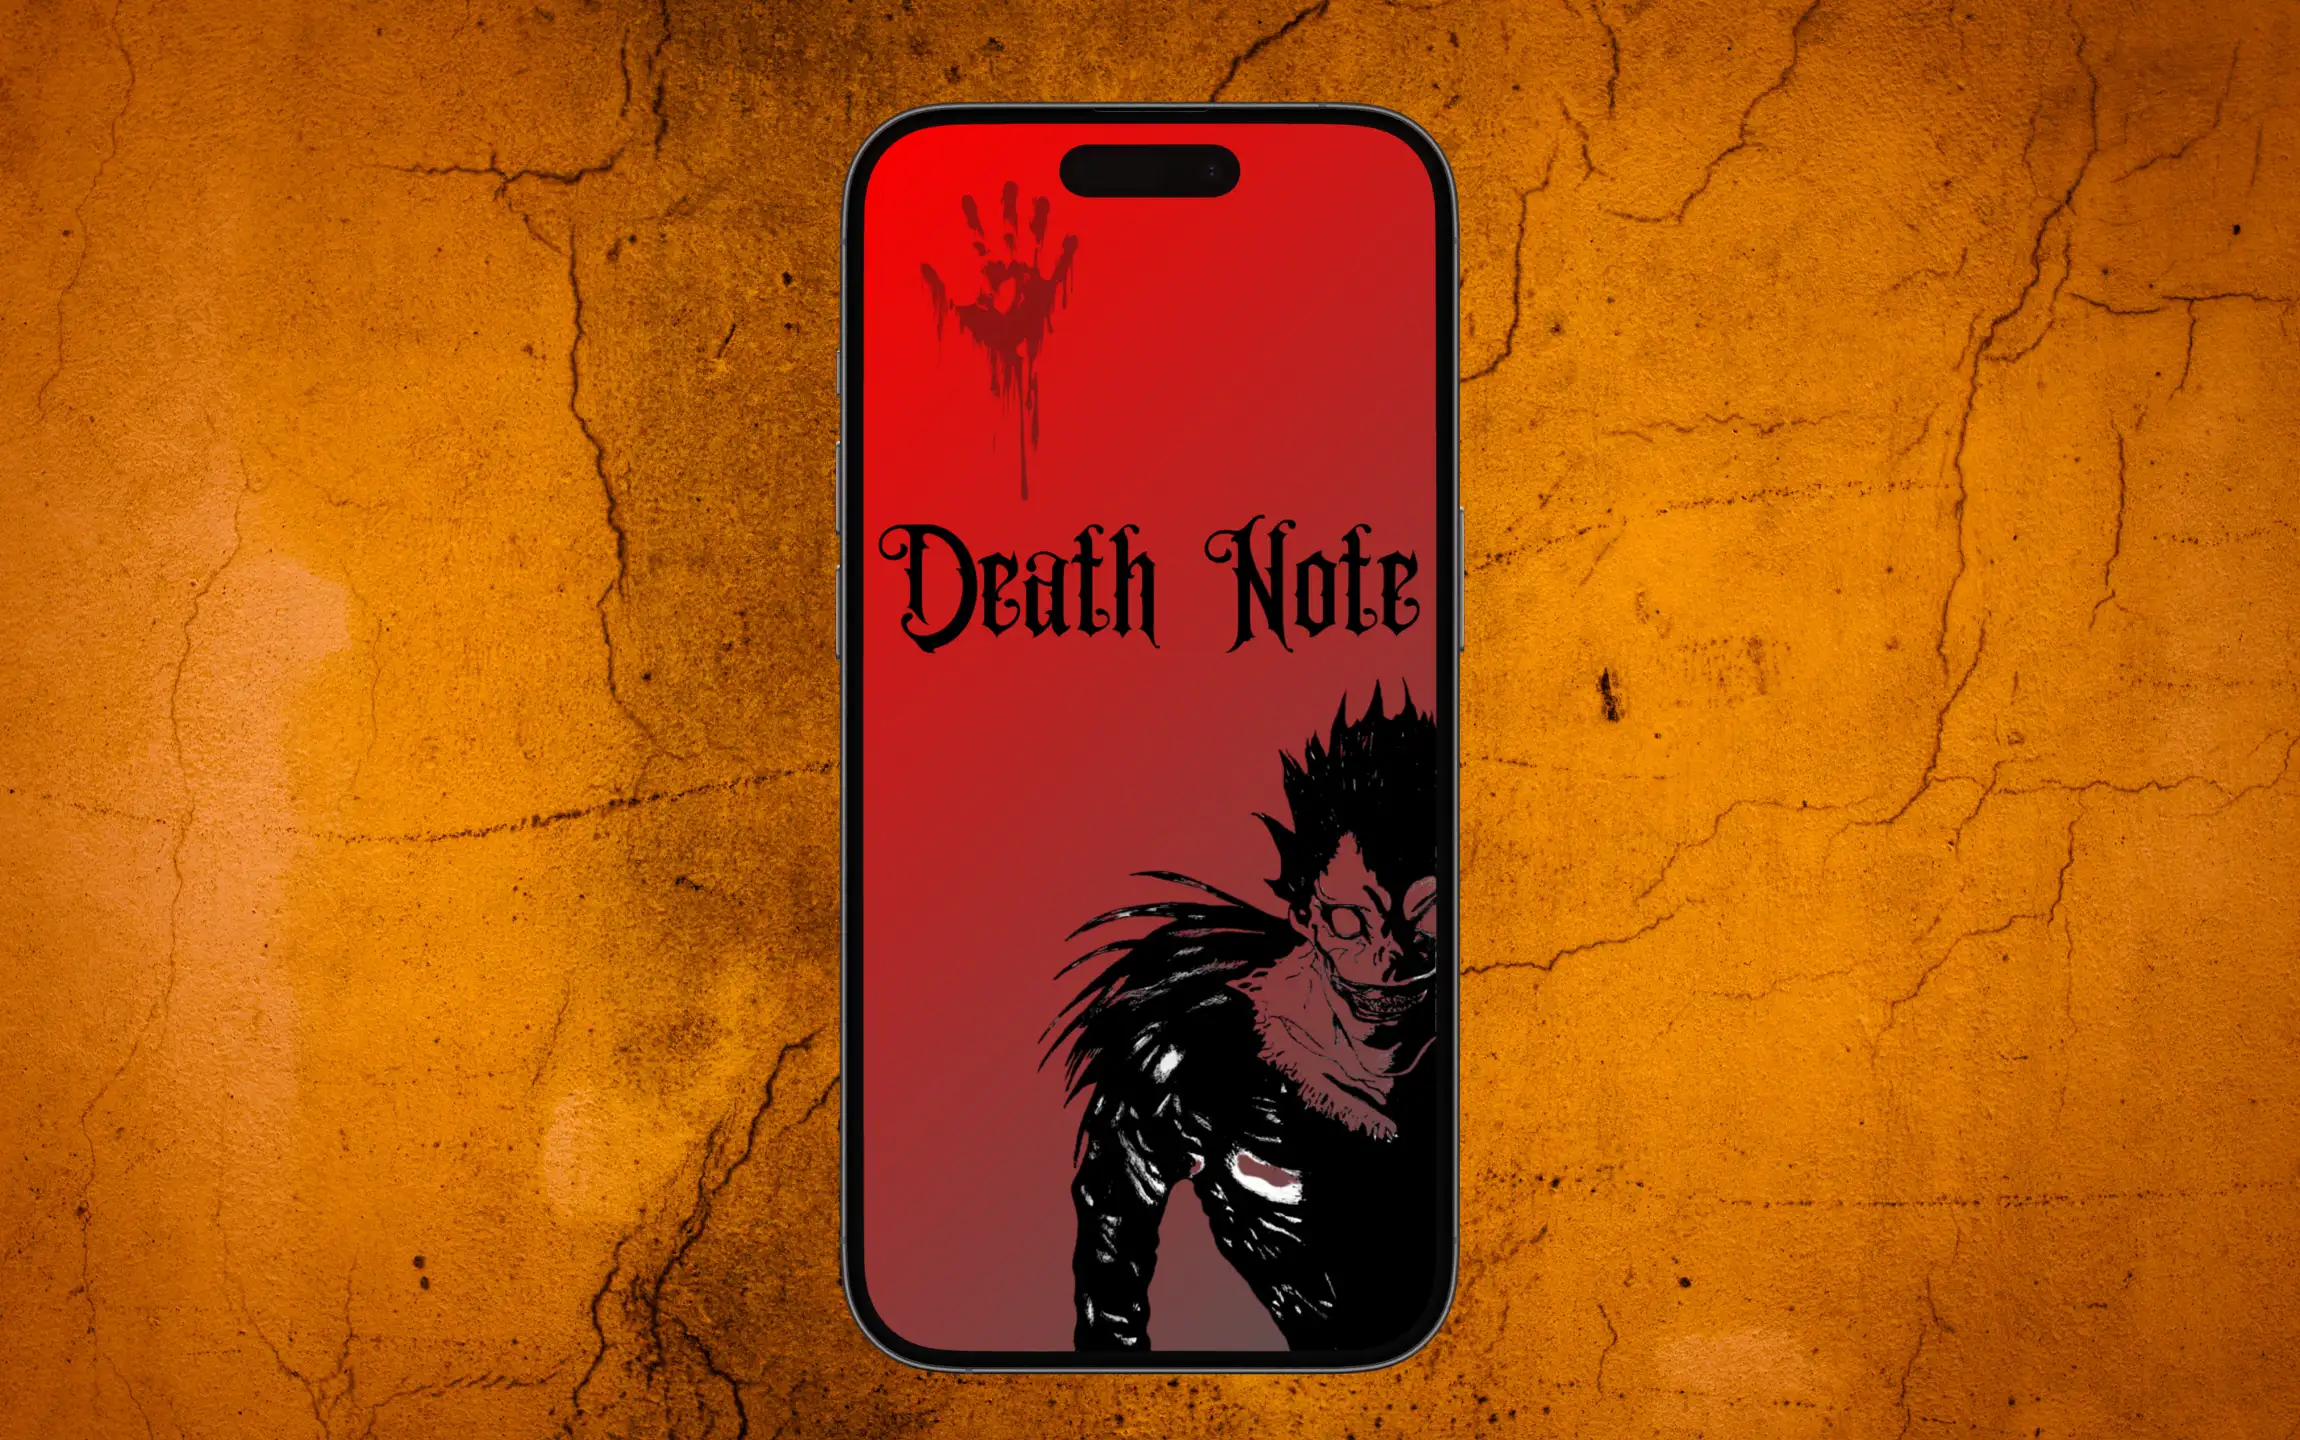 Death note wallpaper for iPhone